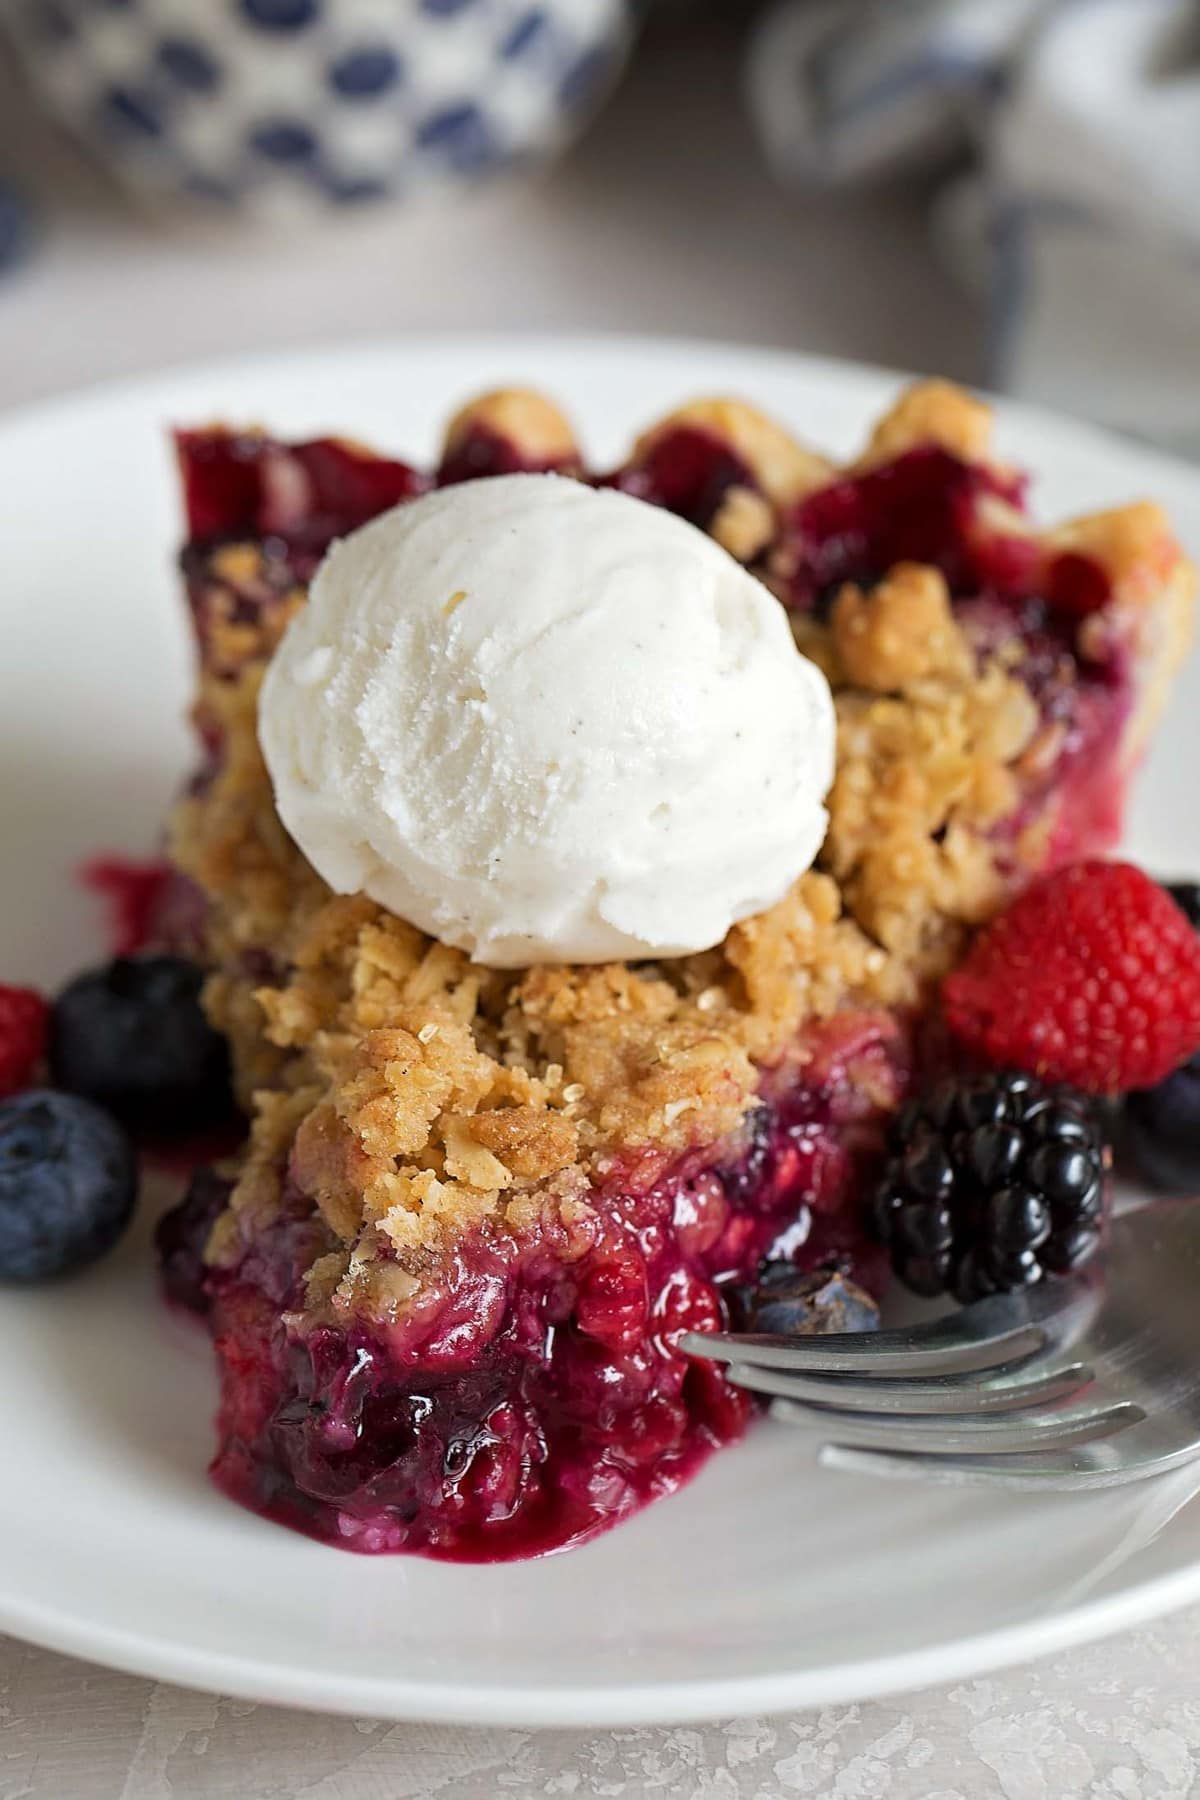 Ice cream topped triple berry pie served on a white plate.